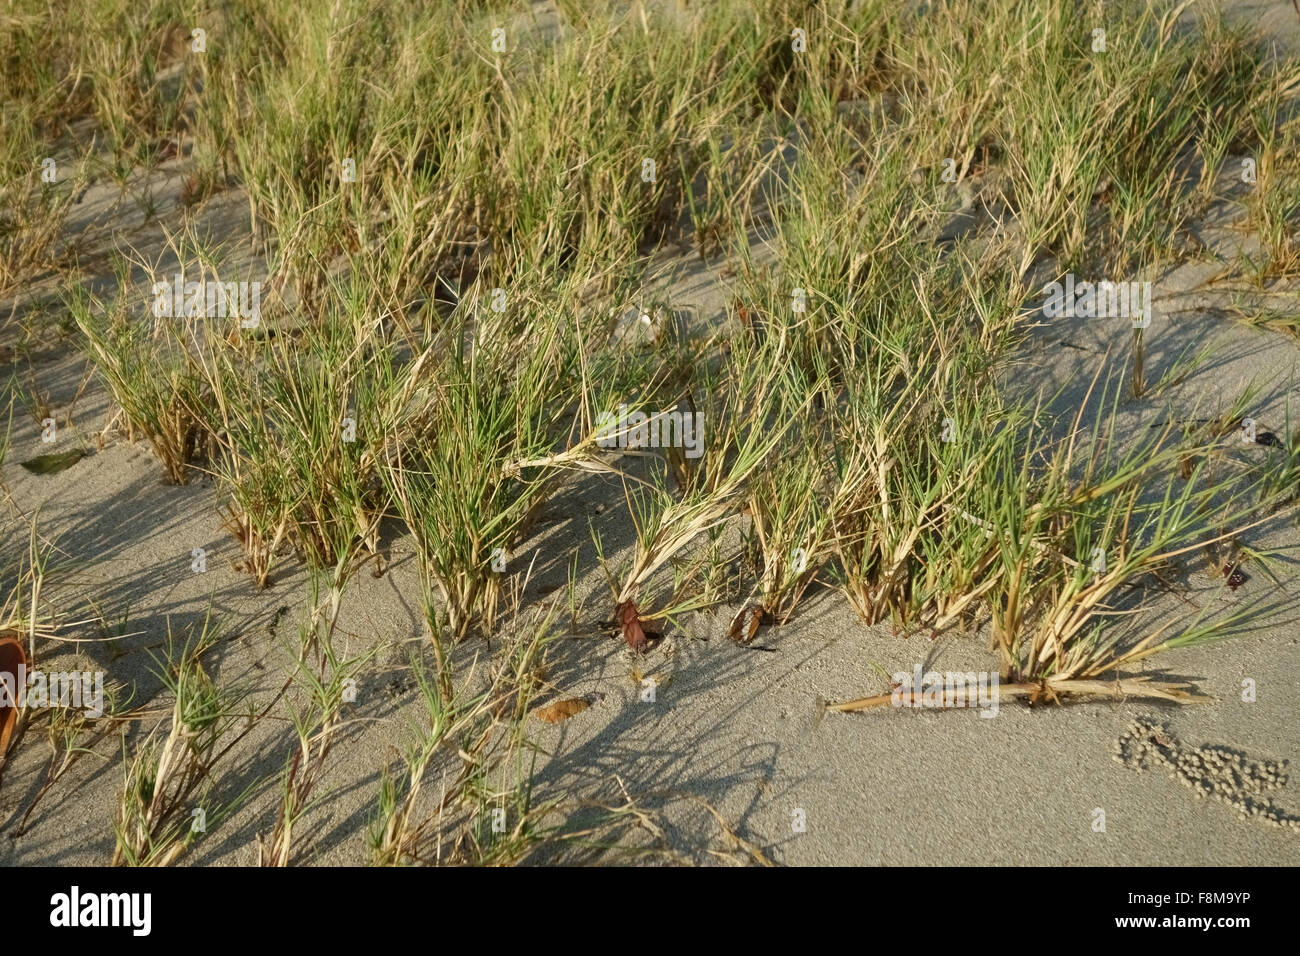 Marine grass growing on the beach  below the high tide line, Krabi Province, Thailand, February Stock Photo